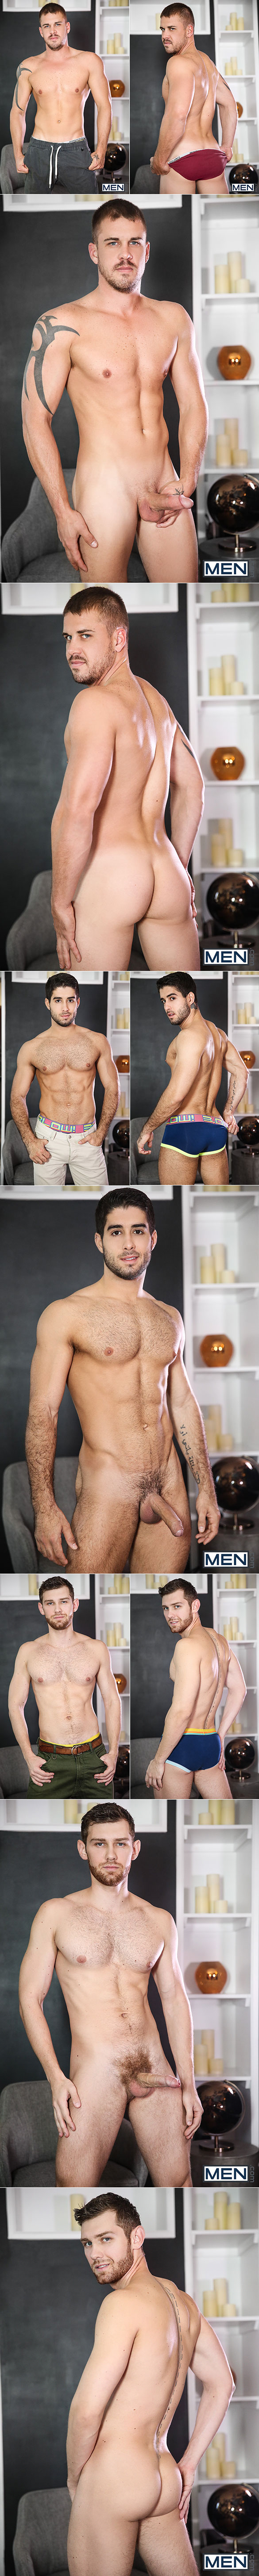 Men.com: Jacob Peterson gets fucked by Darin Silvers and Diego Sans in "Stealth Fuckers, Part 13"